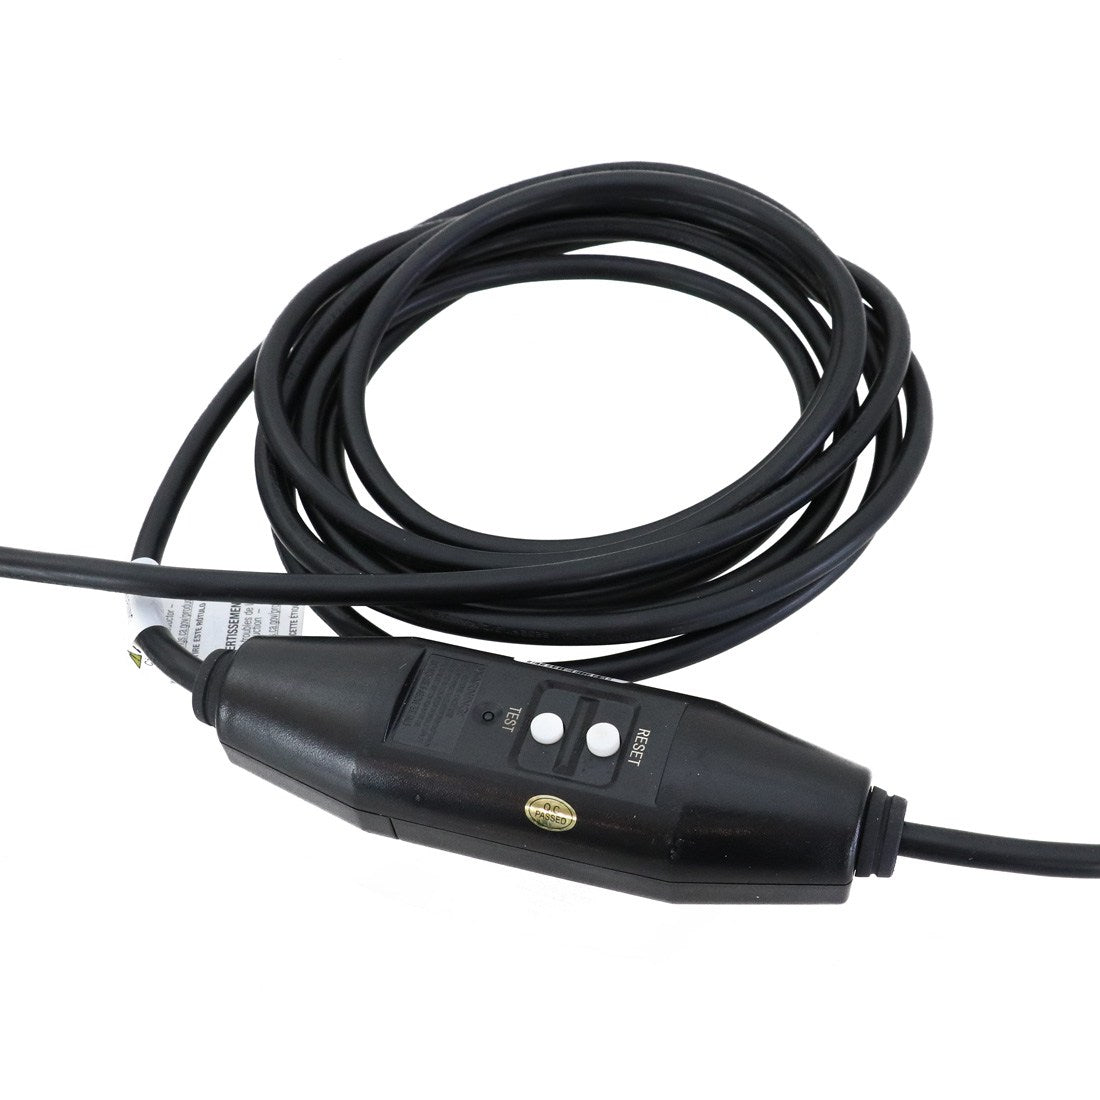 XERO 110V Booster Pump Cable, Reset and Test Button View